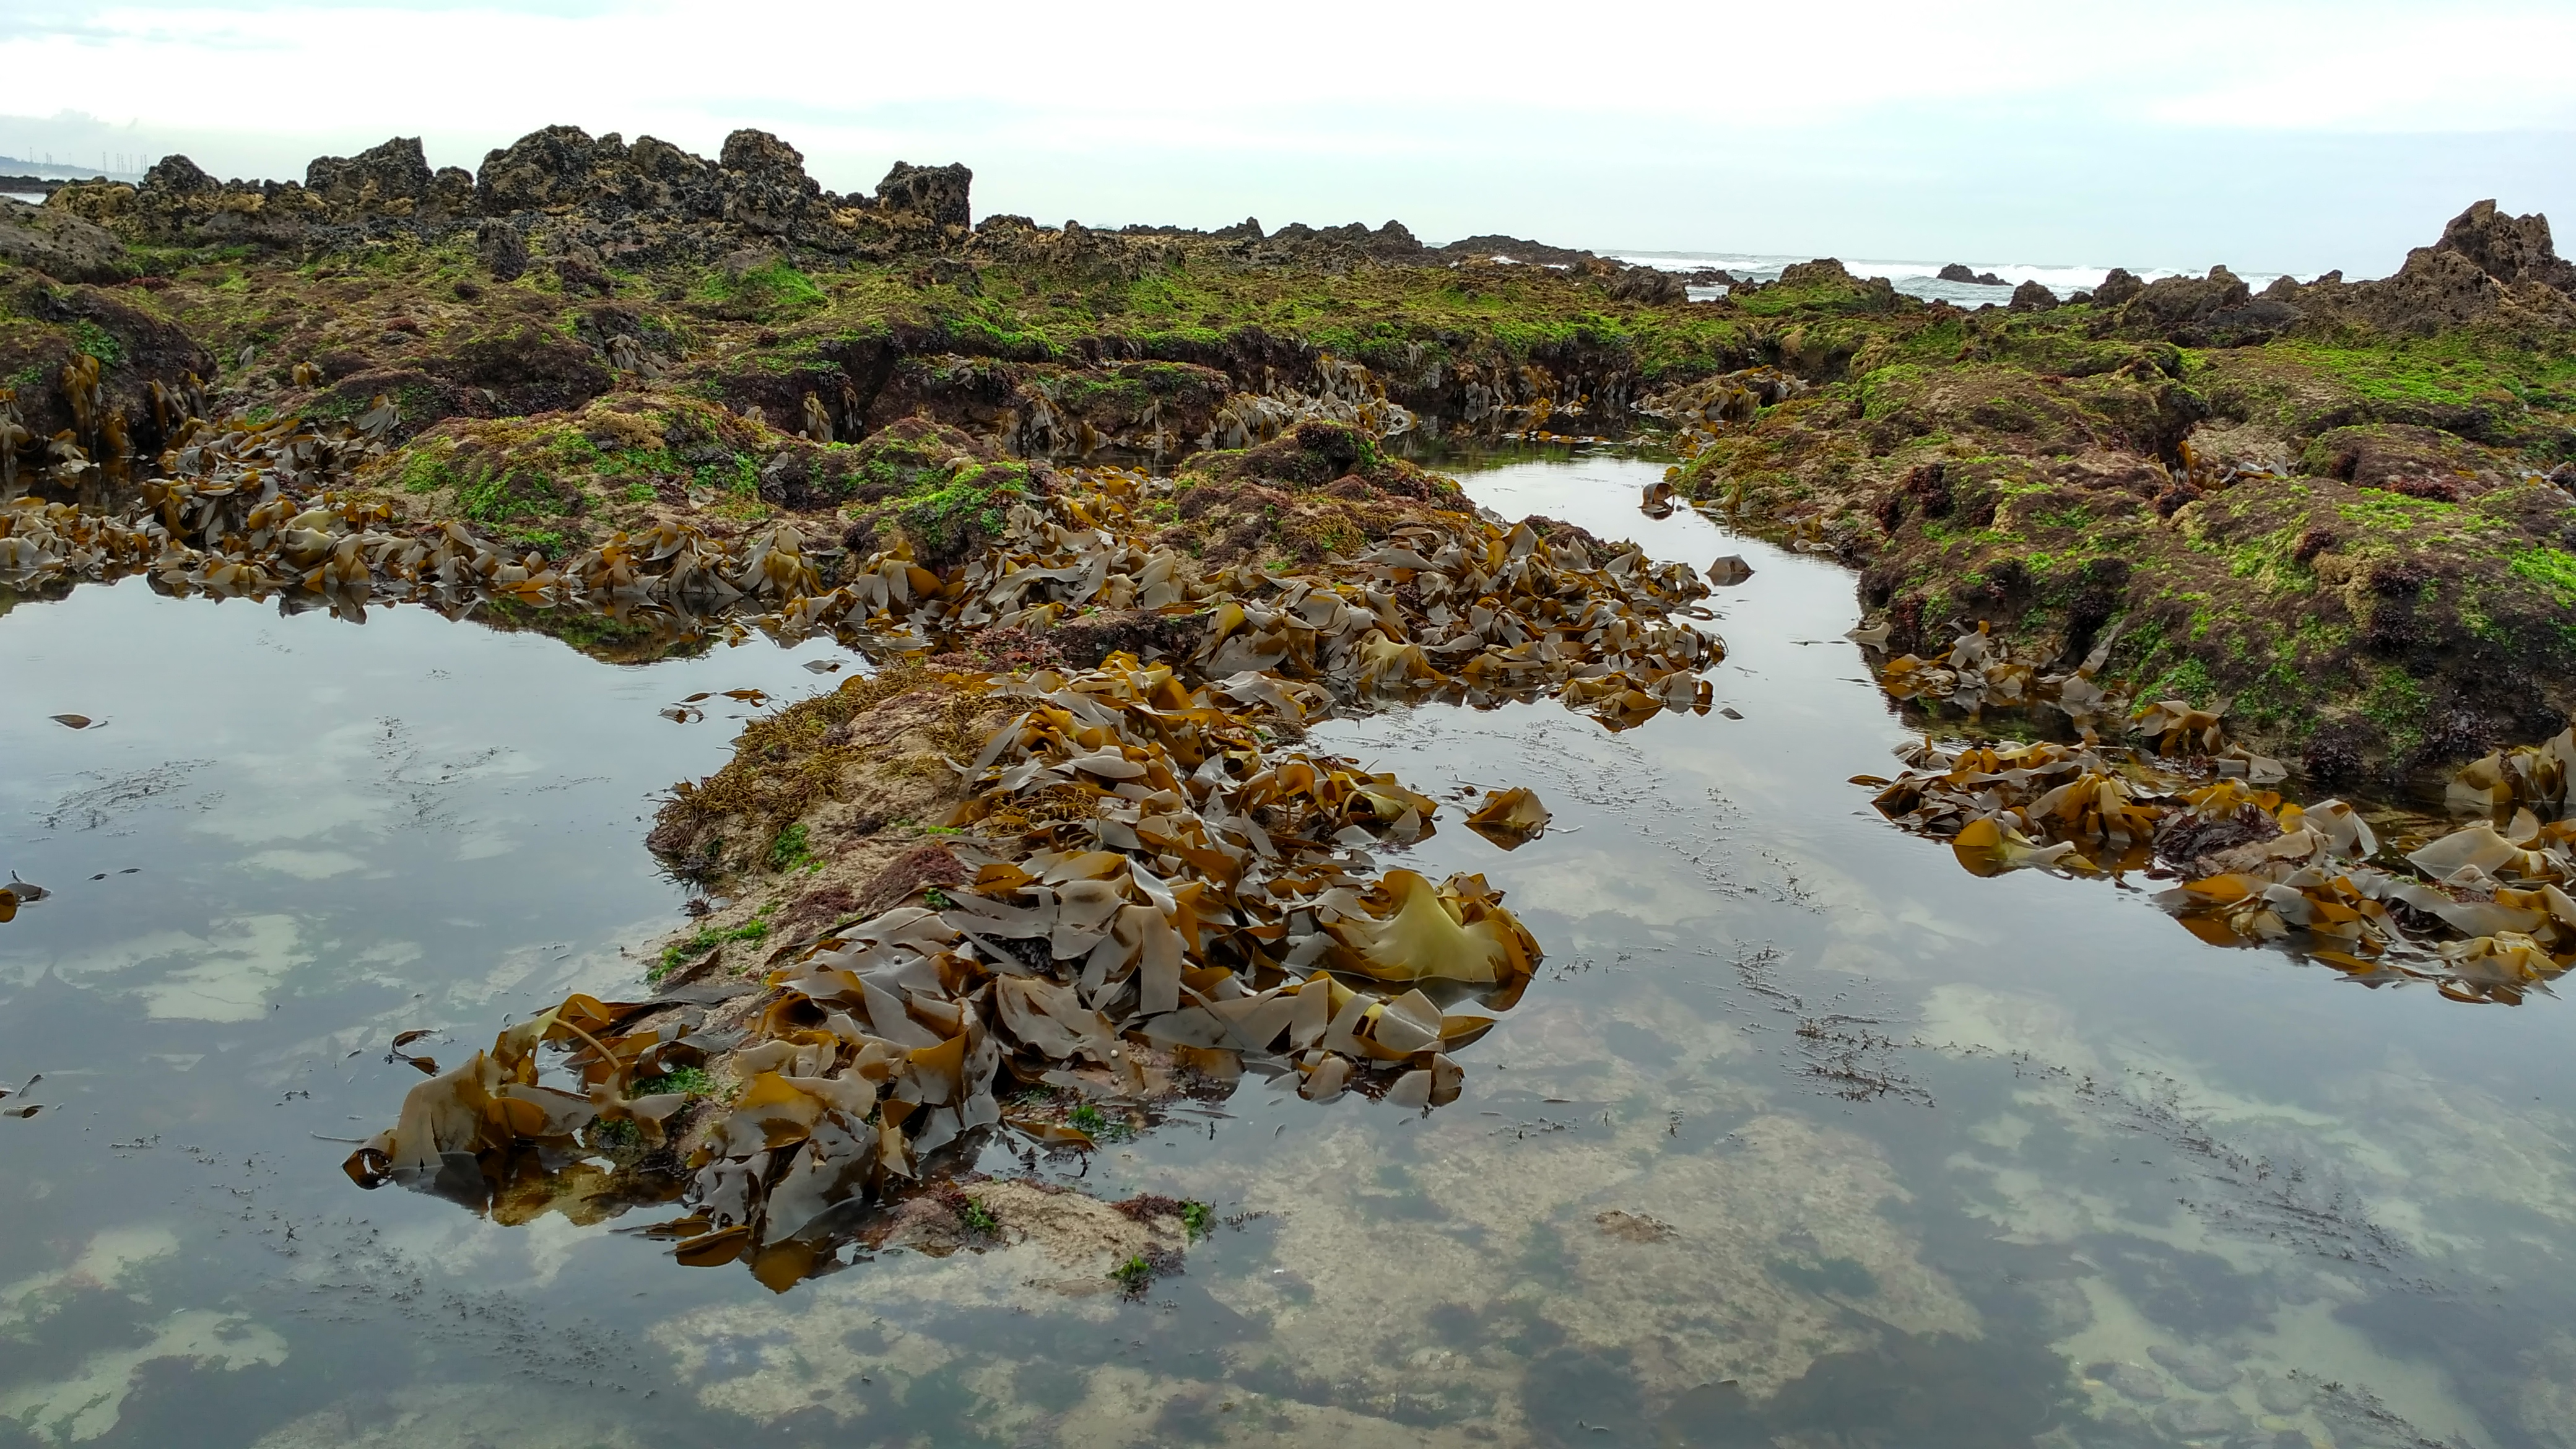 A healthy intertidal kelp forest